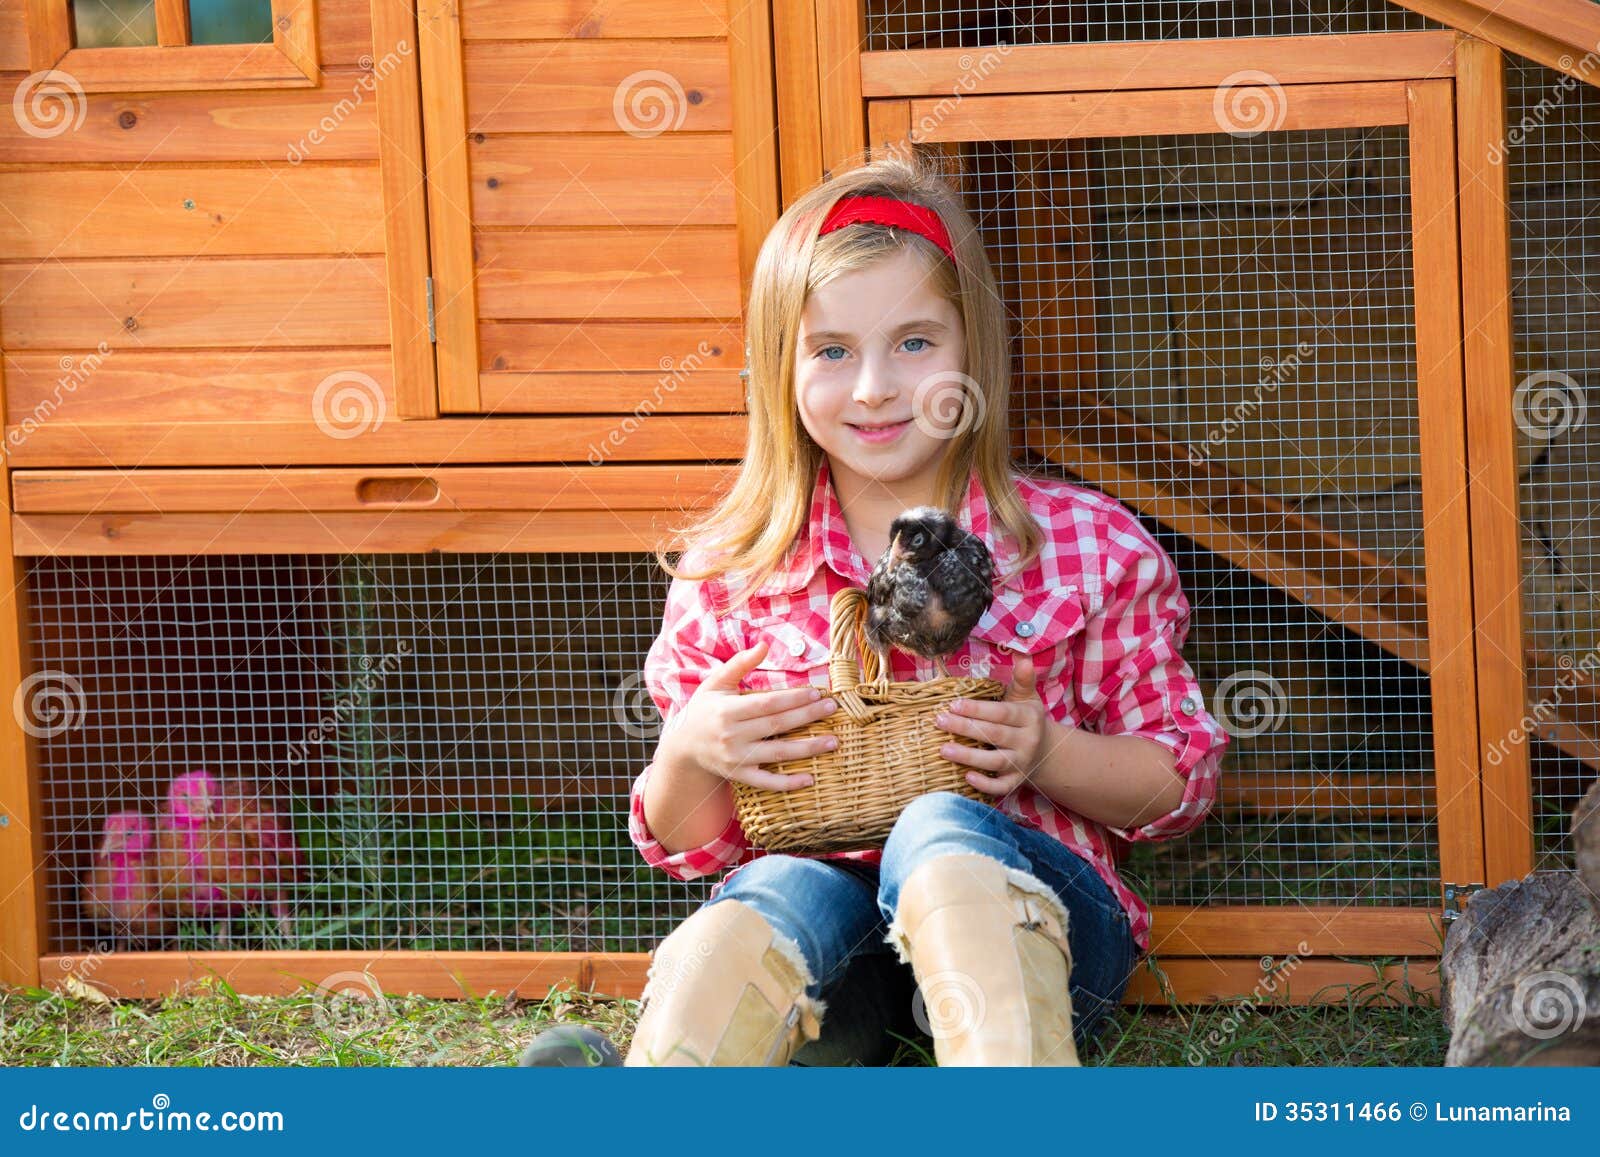 ... With Chicks In Chicken Coop Royalty Free Stock Image - Image: 35311466